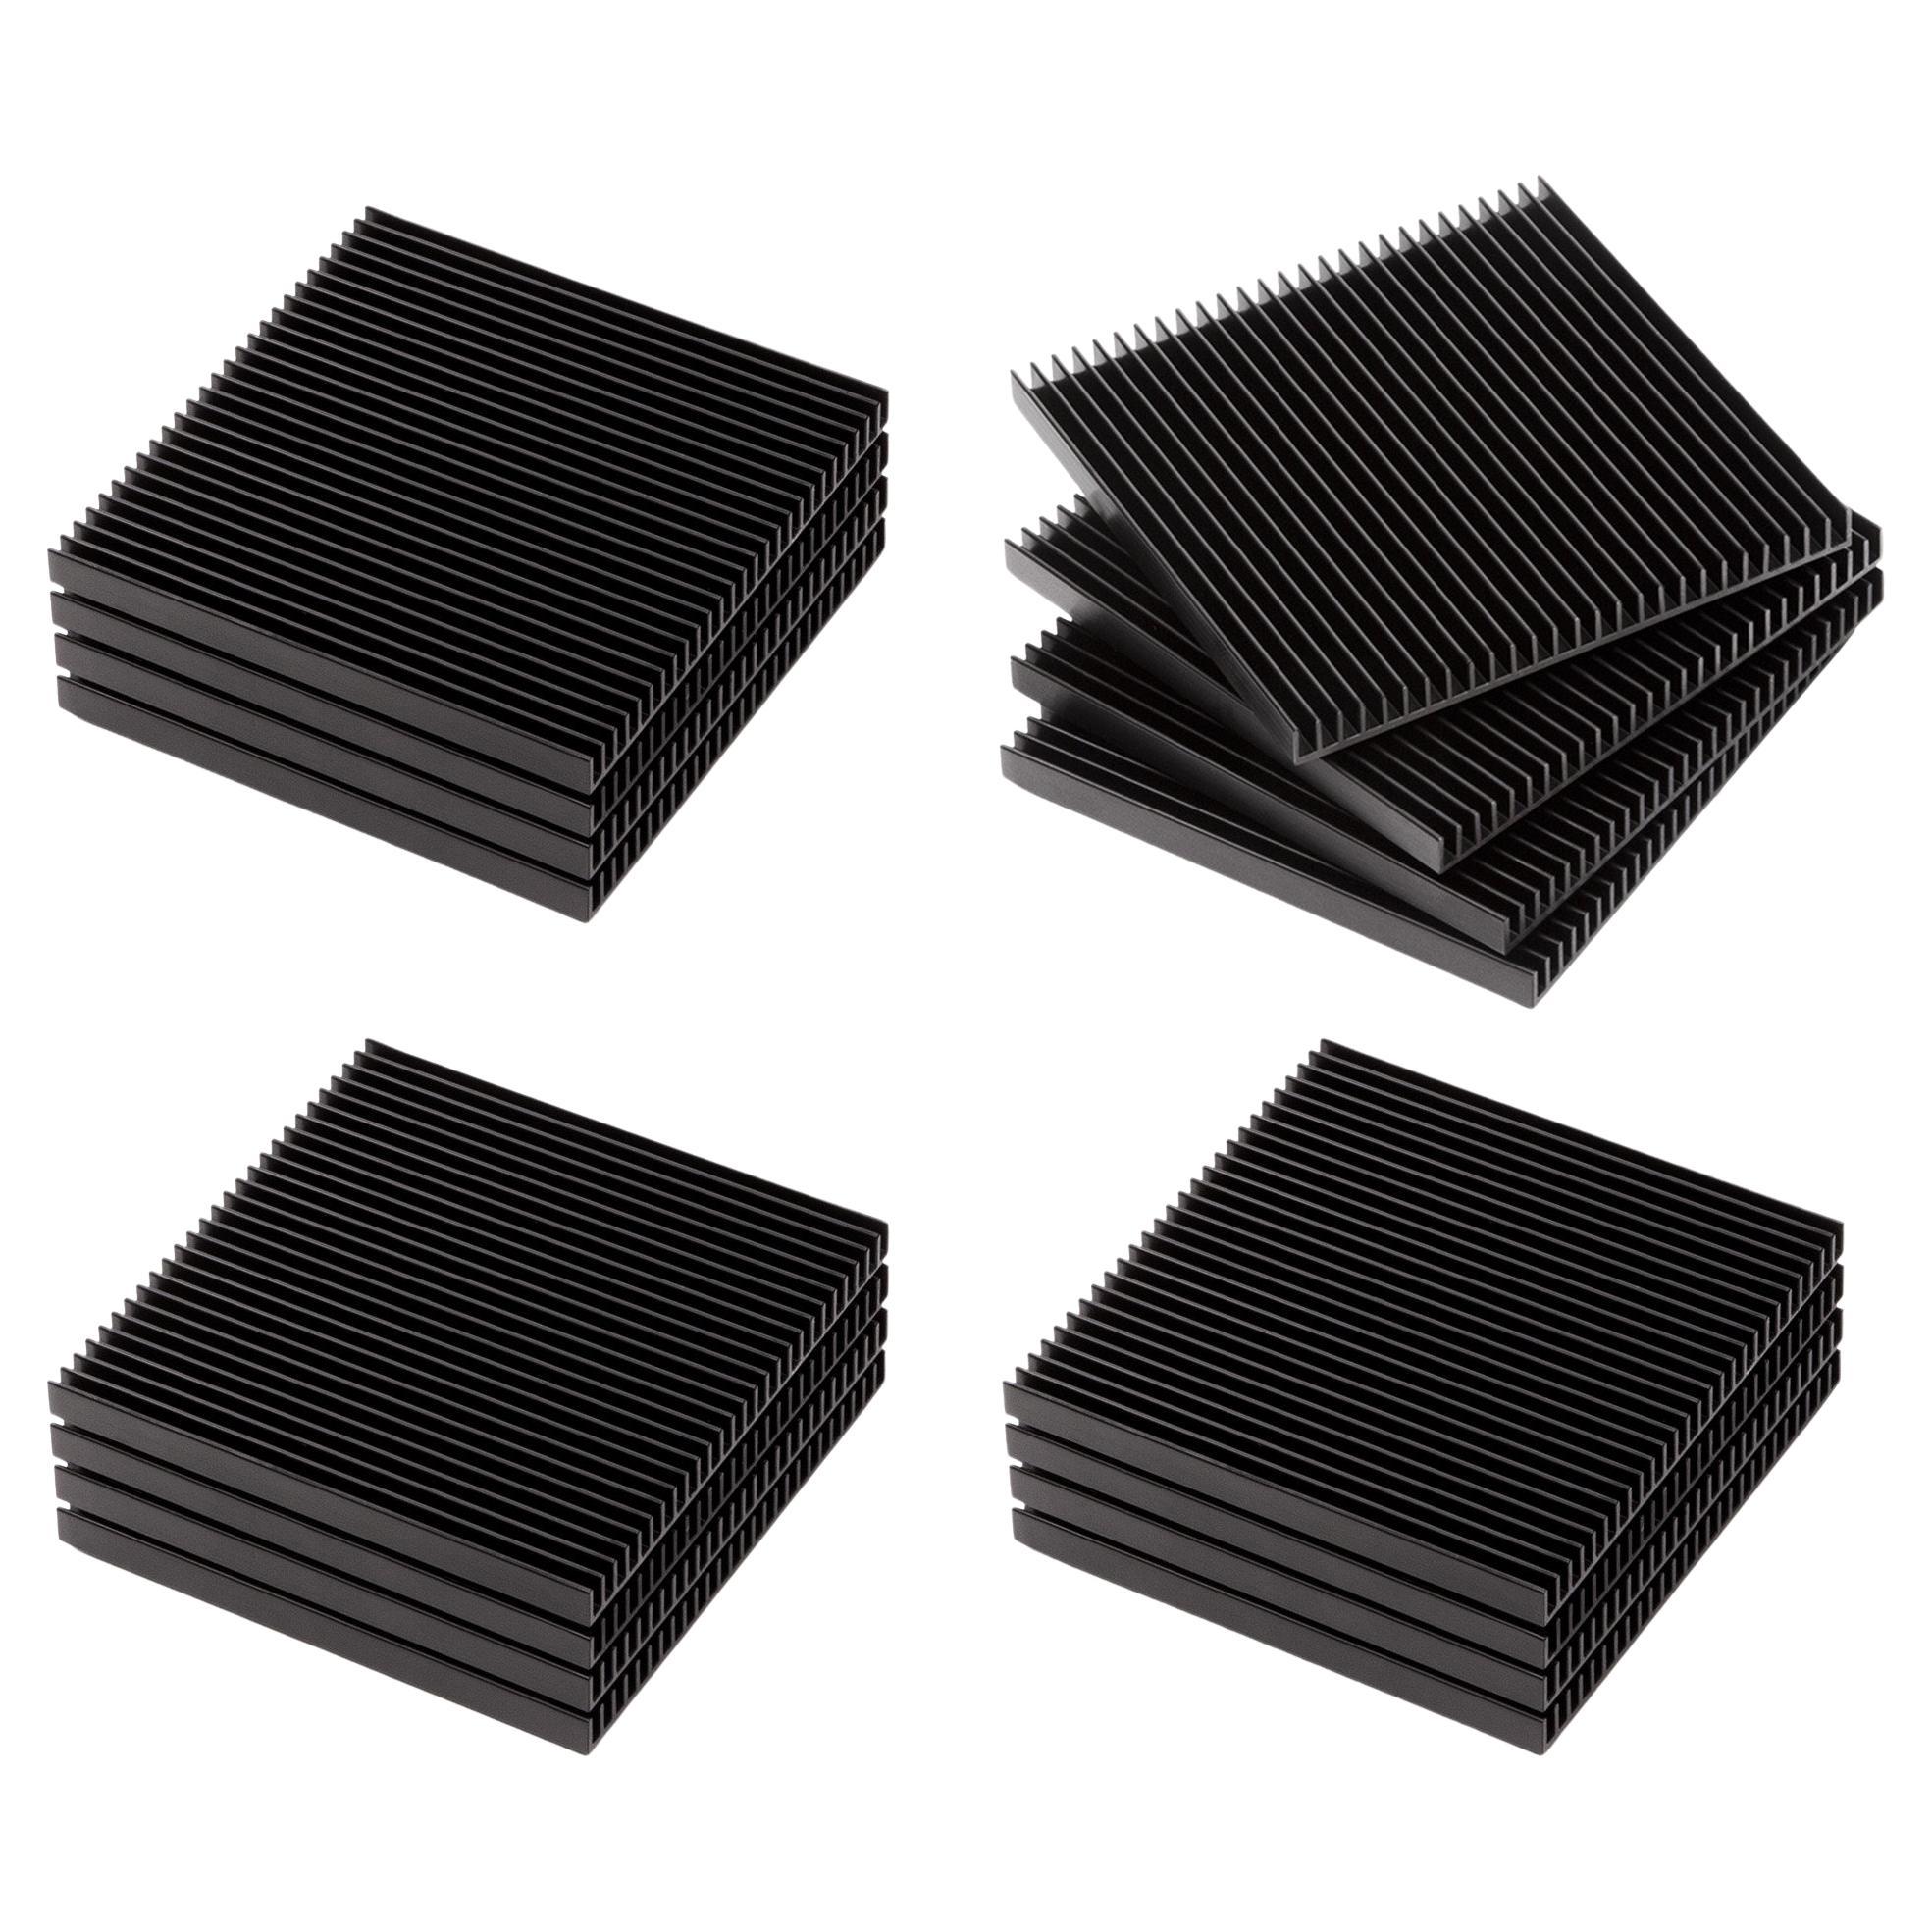 Sixteen Fin Coasters from Souda, In Stock, Black.